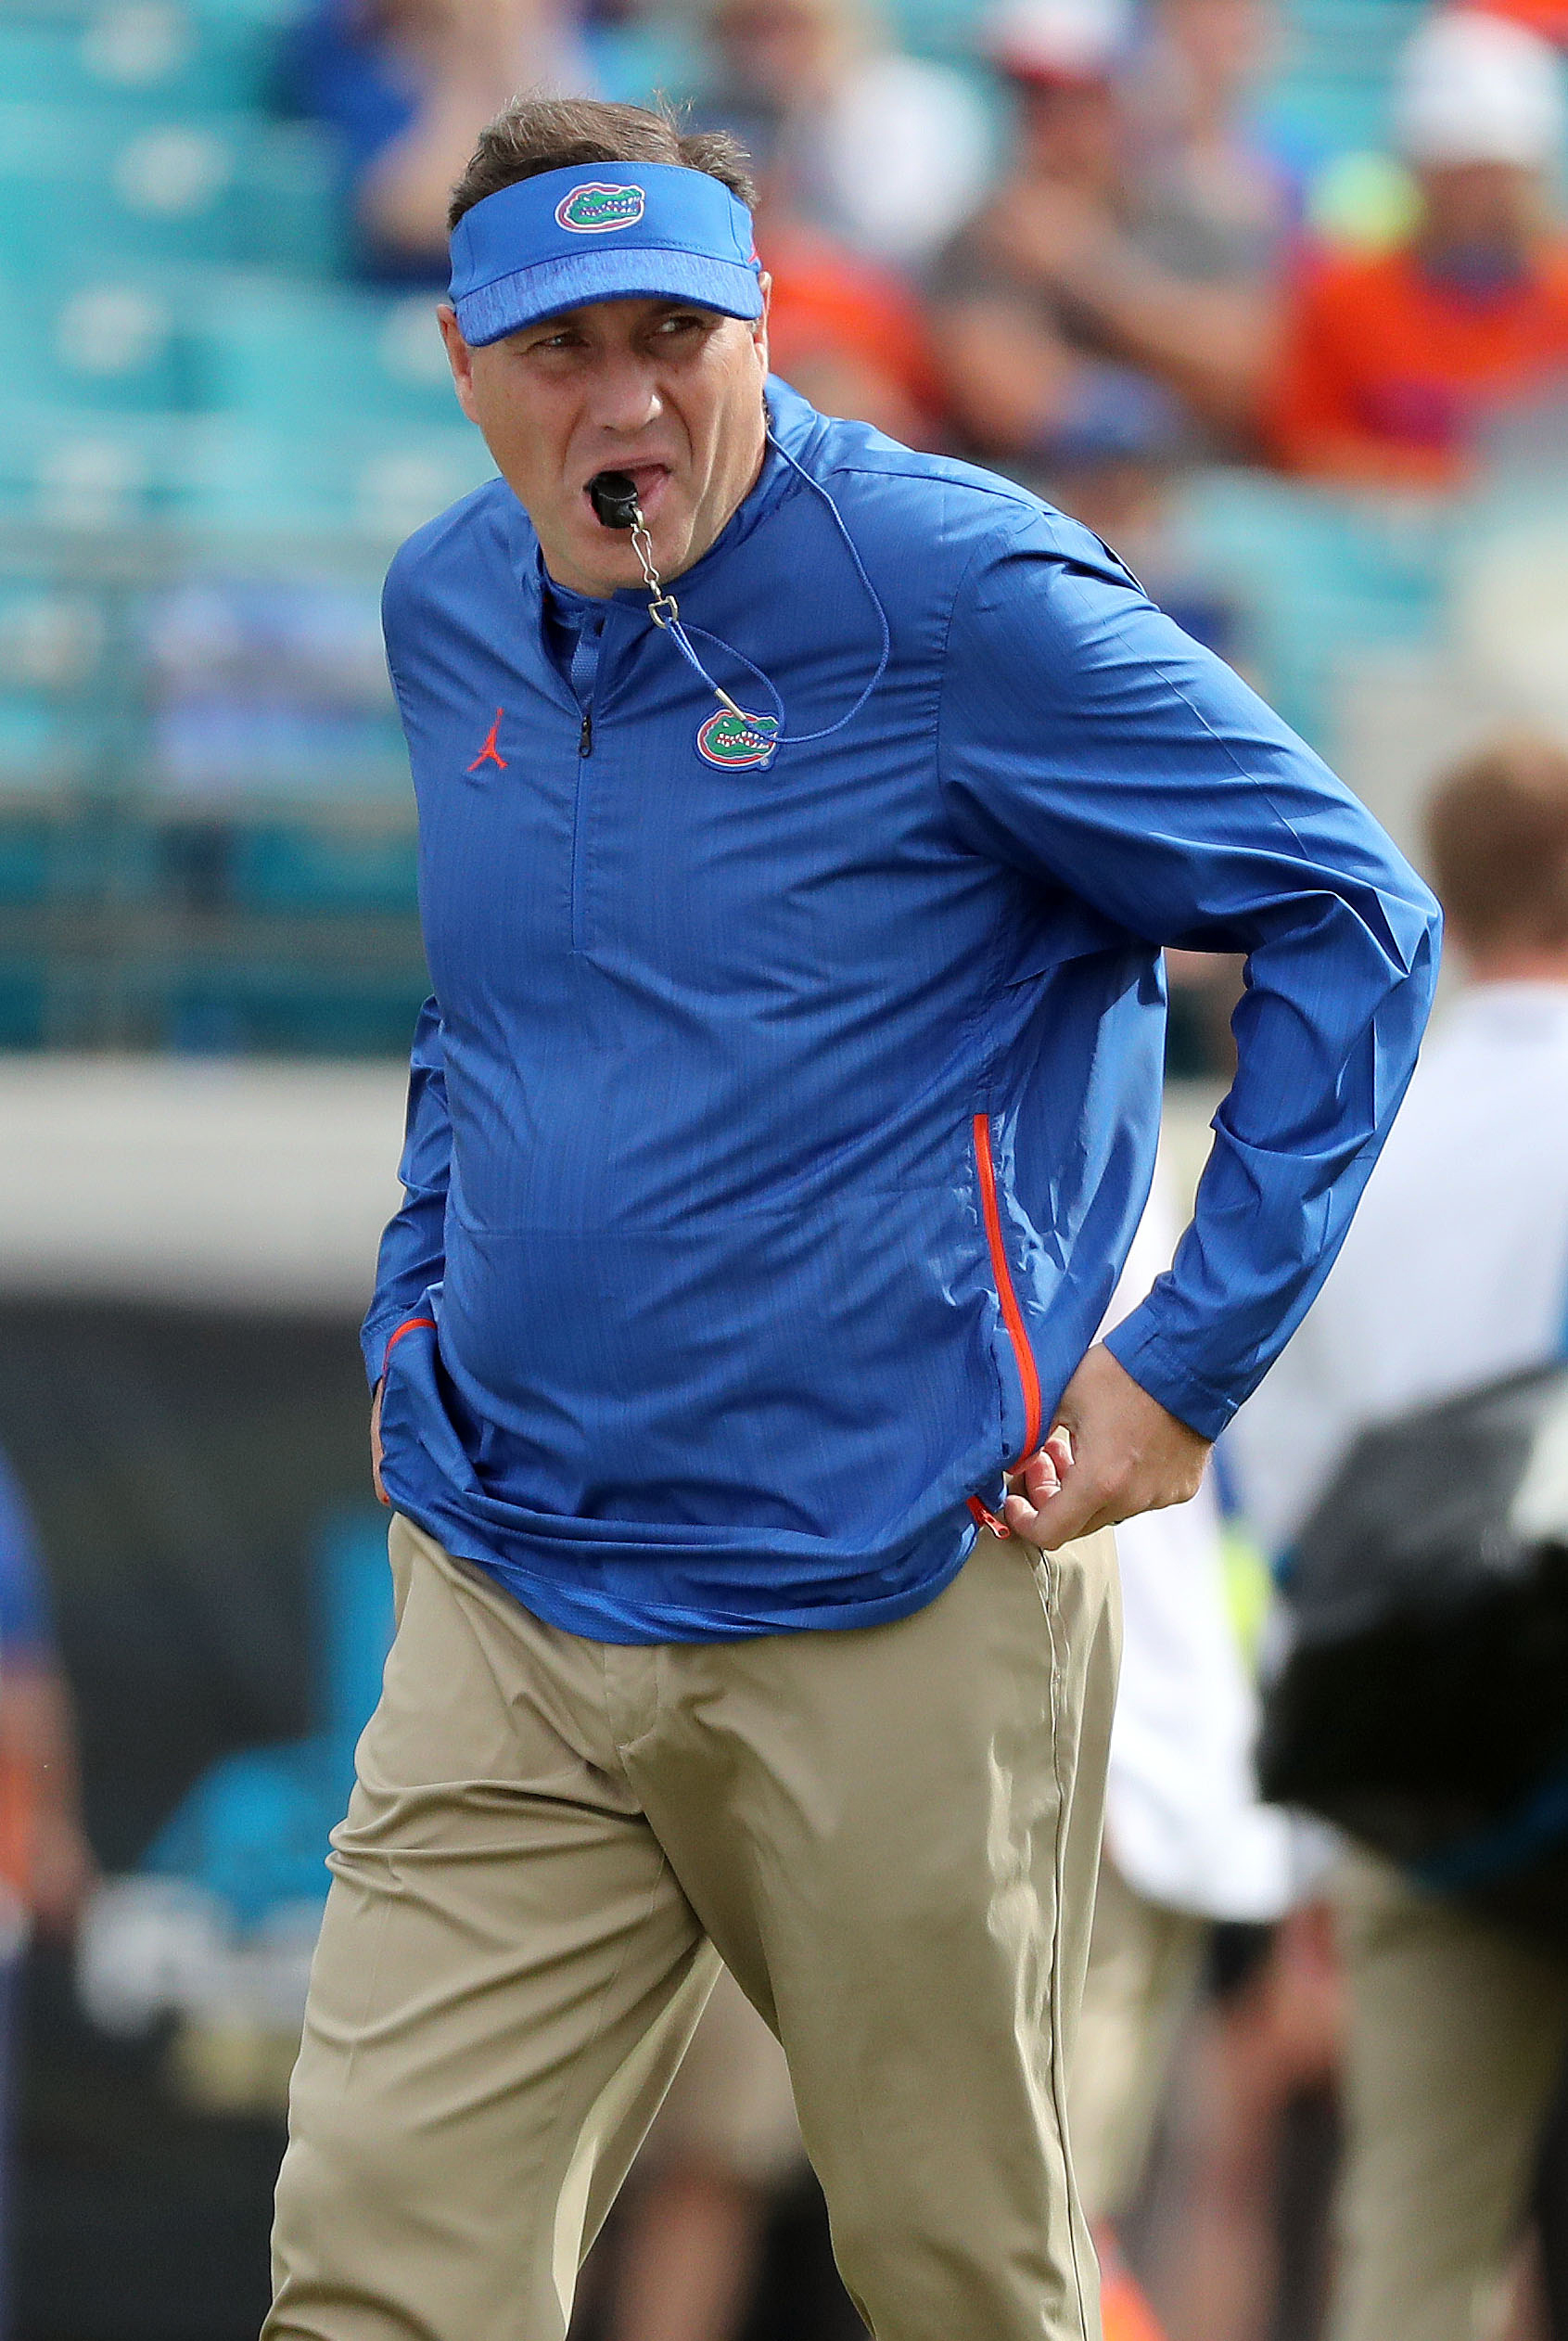 Dan Mullen disappointed by execution, turnovers in Florida's loss to